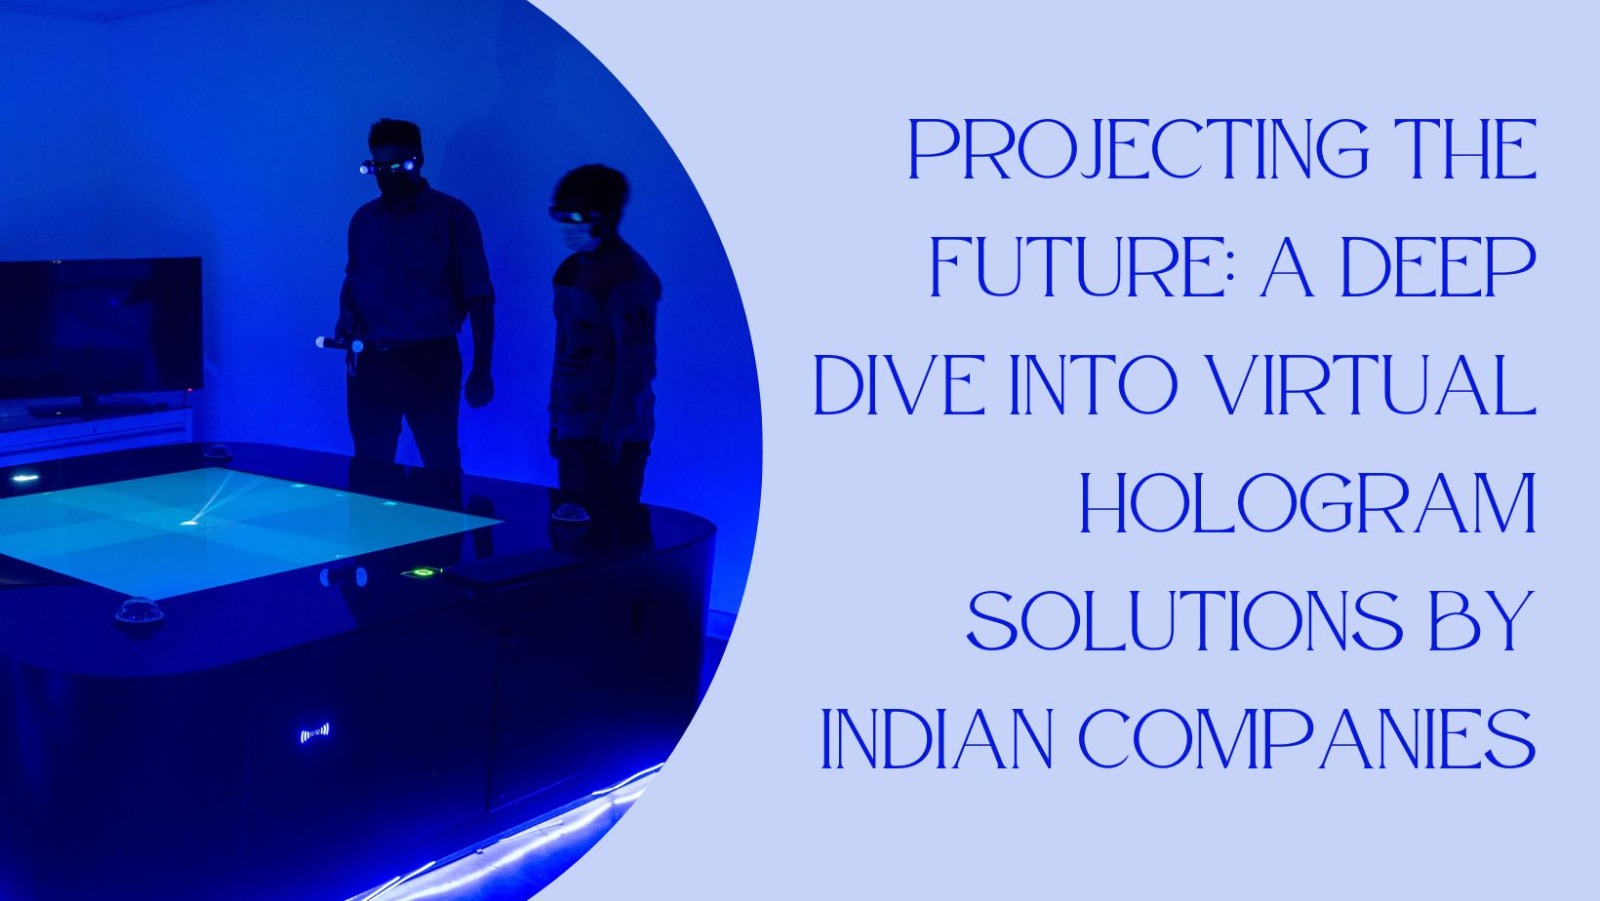 Projecting the Future: A Deep Dive into Virtual Hologram Solutions by Indian Companies